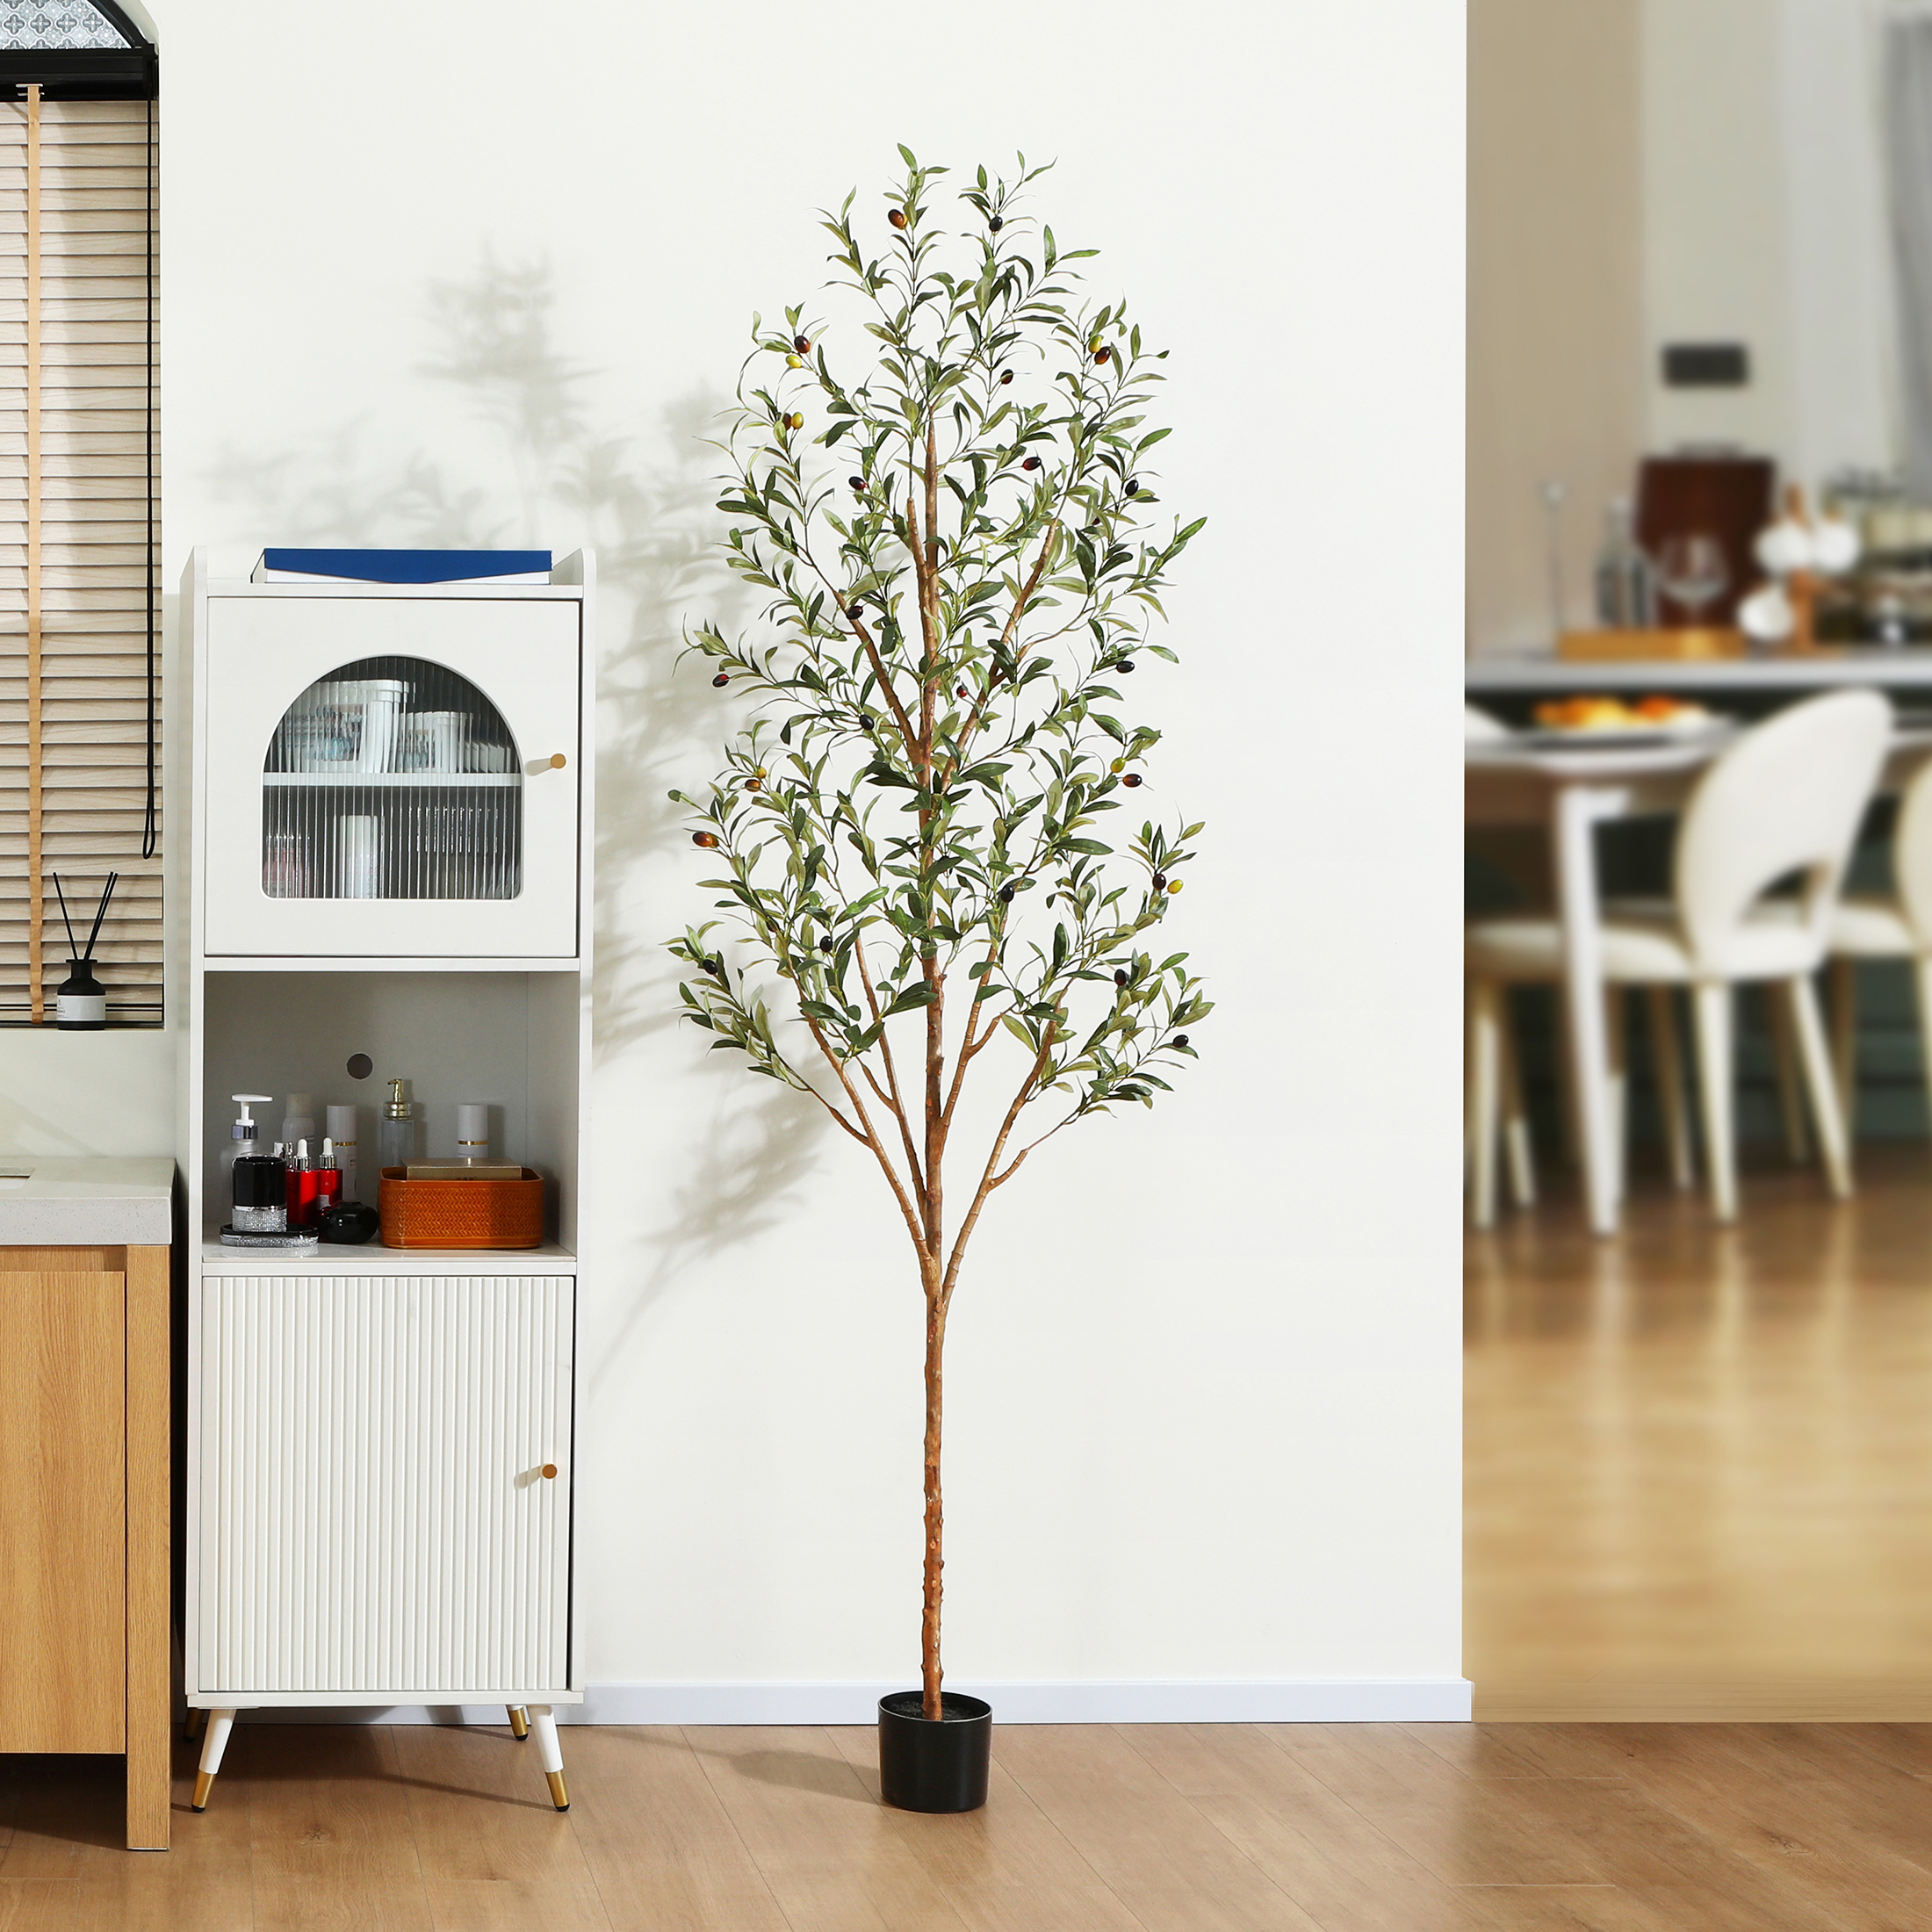 7 ft Artificial Olive Plants with Realistic Leaves and Natural Trunk, Silk Fake Potted Tree with Wood Branches and Fruits, Faux Olive Tree for Office Home Decor - image 1 of 8